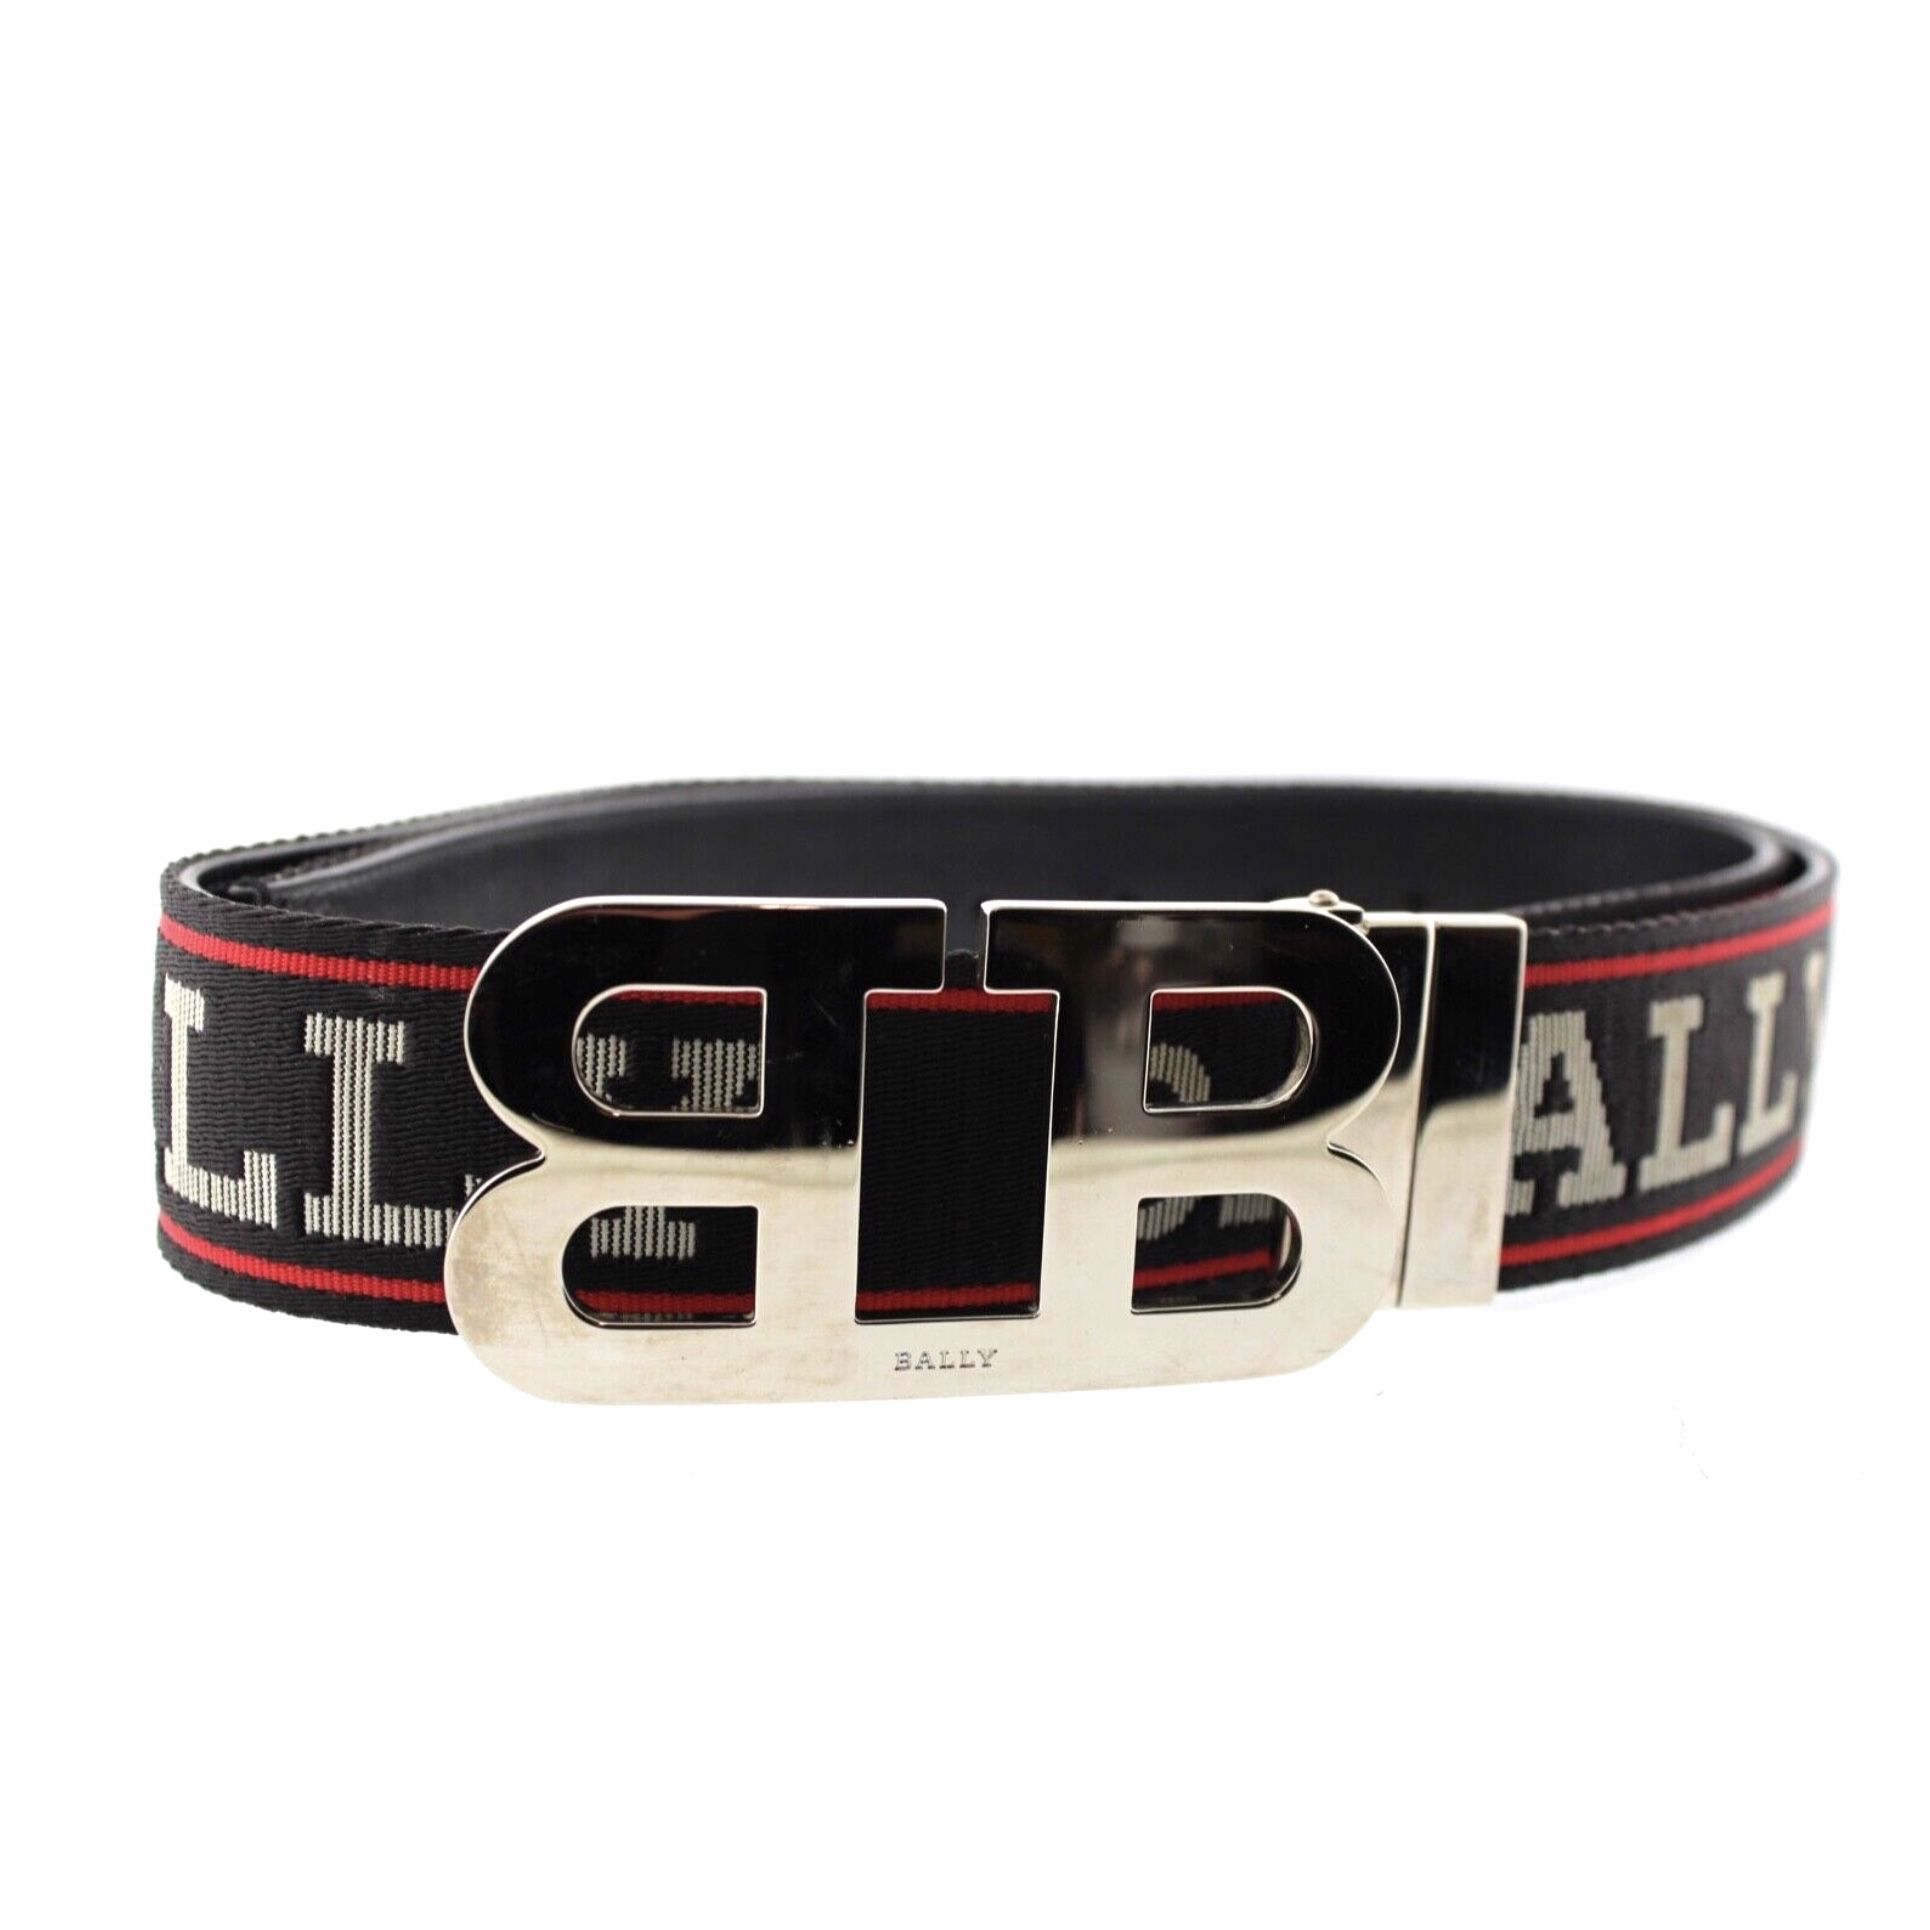 Bally Mirror B Buckle Belt Size 40 Black Red White Leather Textile